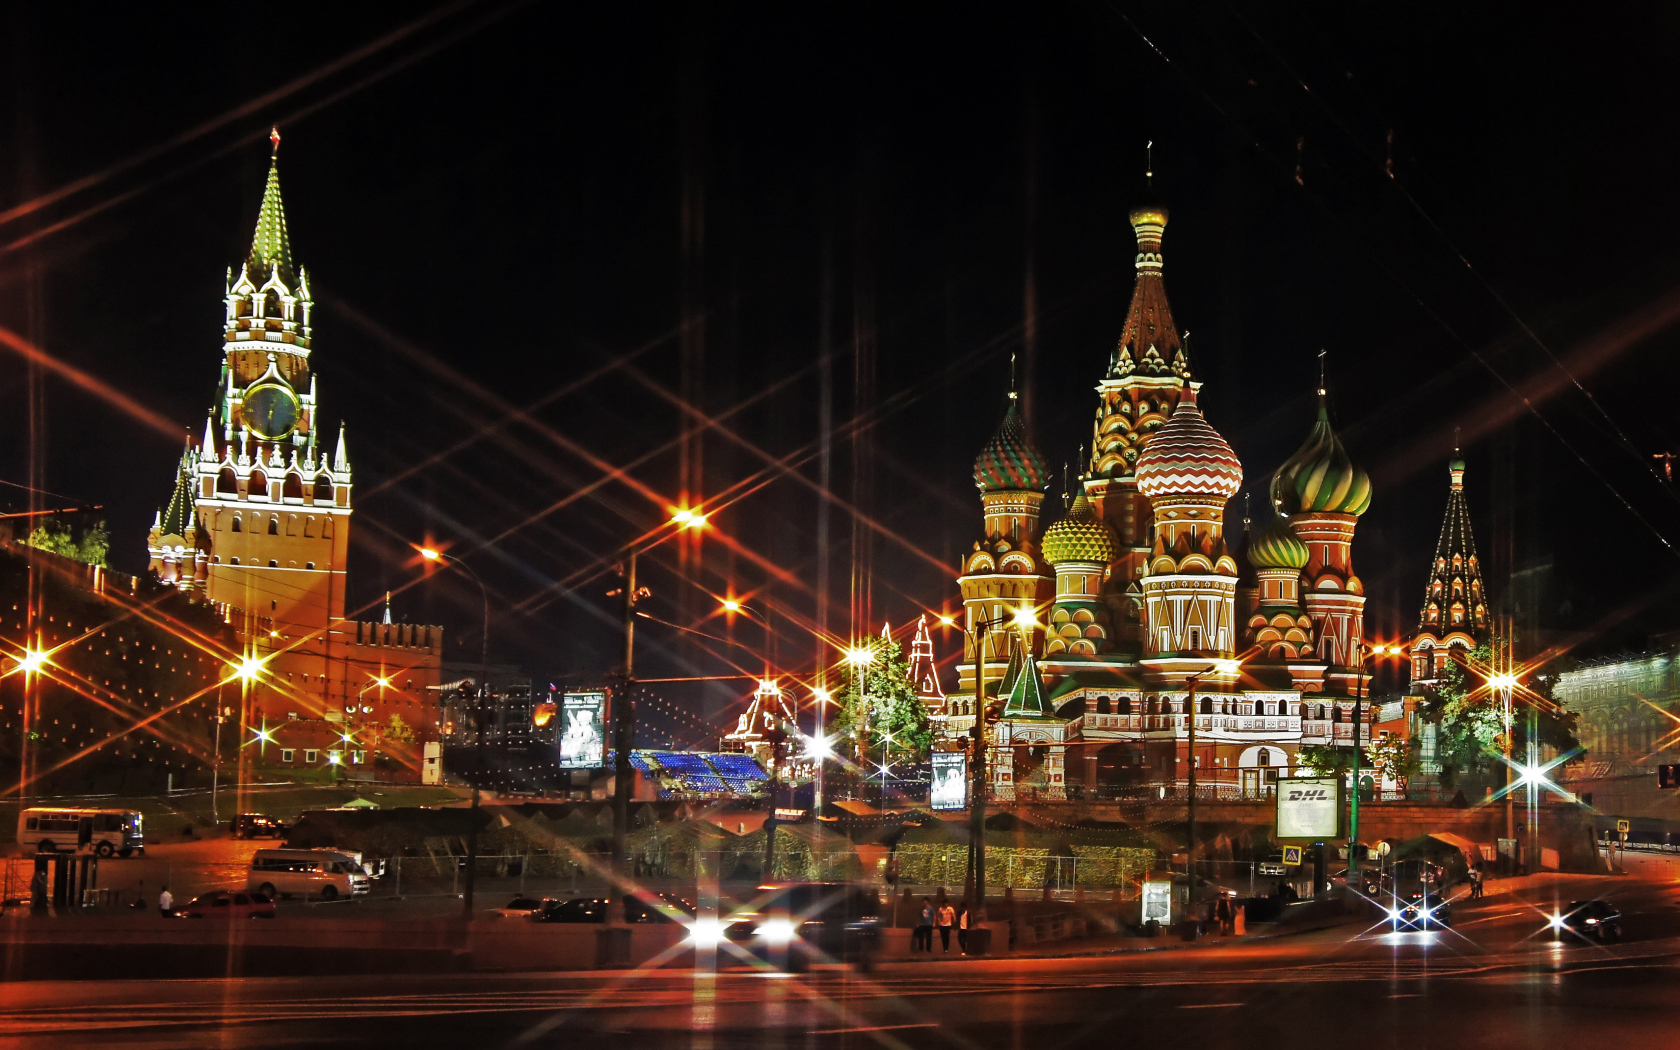 Moscow and the bright lights